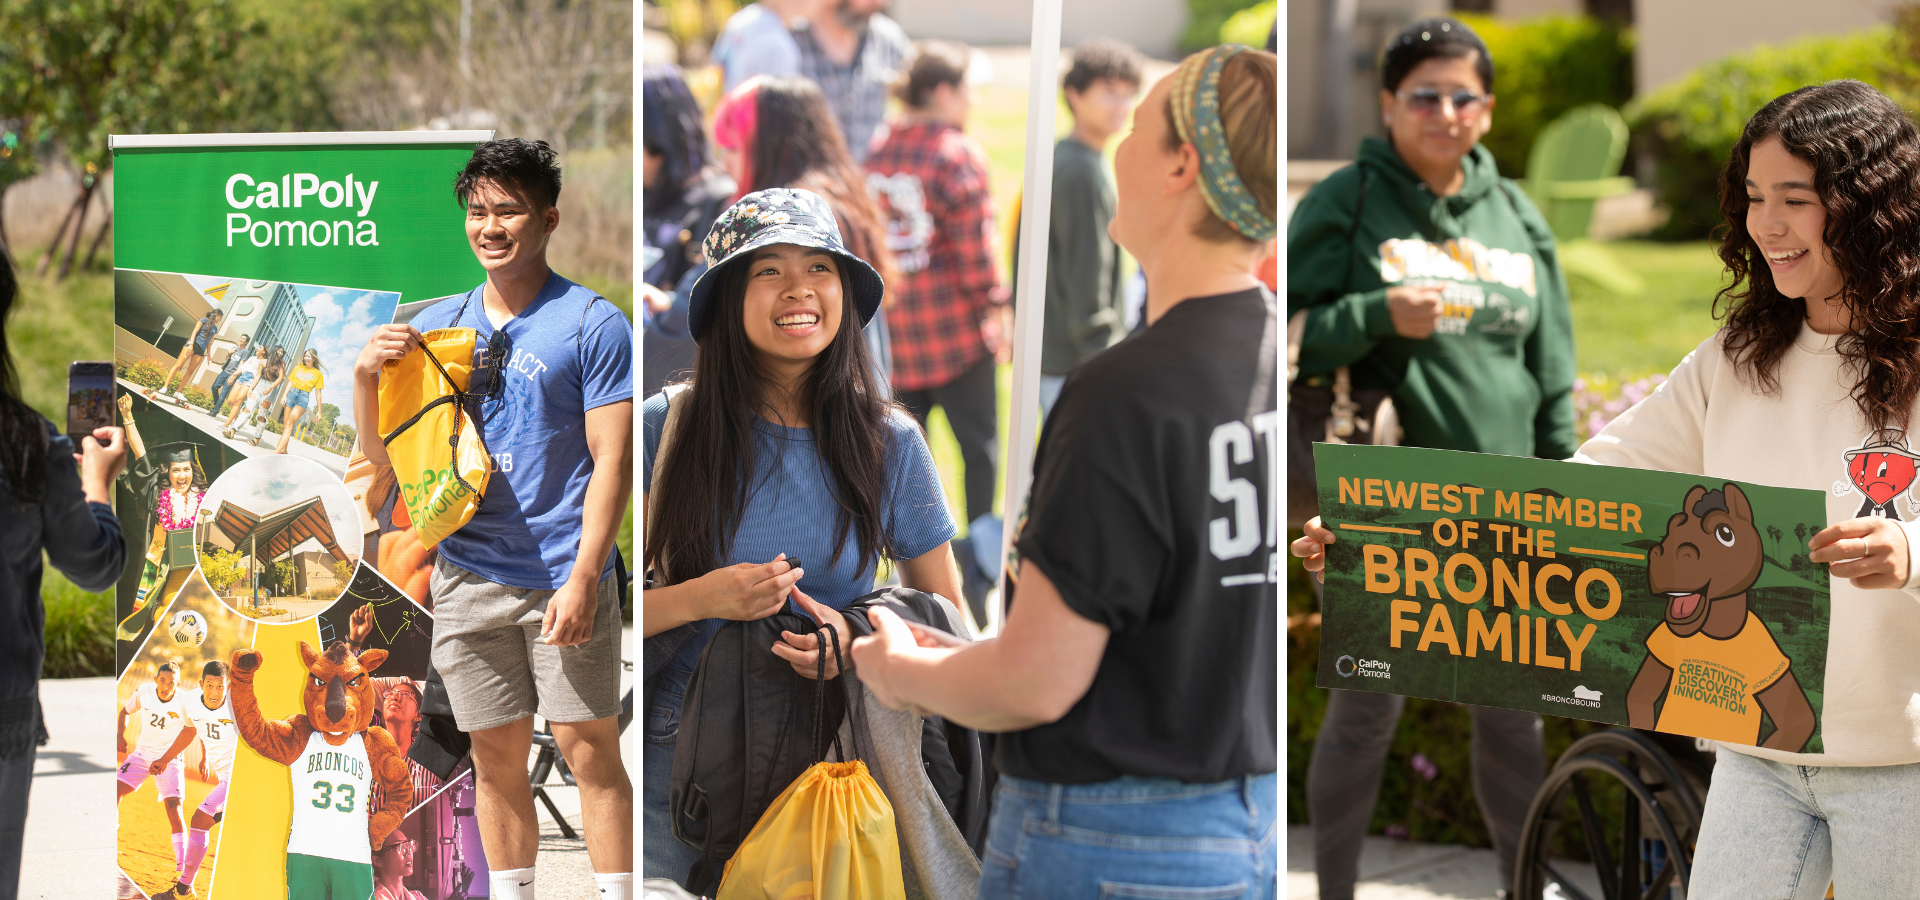 Male student poses on a Cal Poly Pomona banner, female student talks with a peer, female student holding sign that says Newest member of the Bronco family.